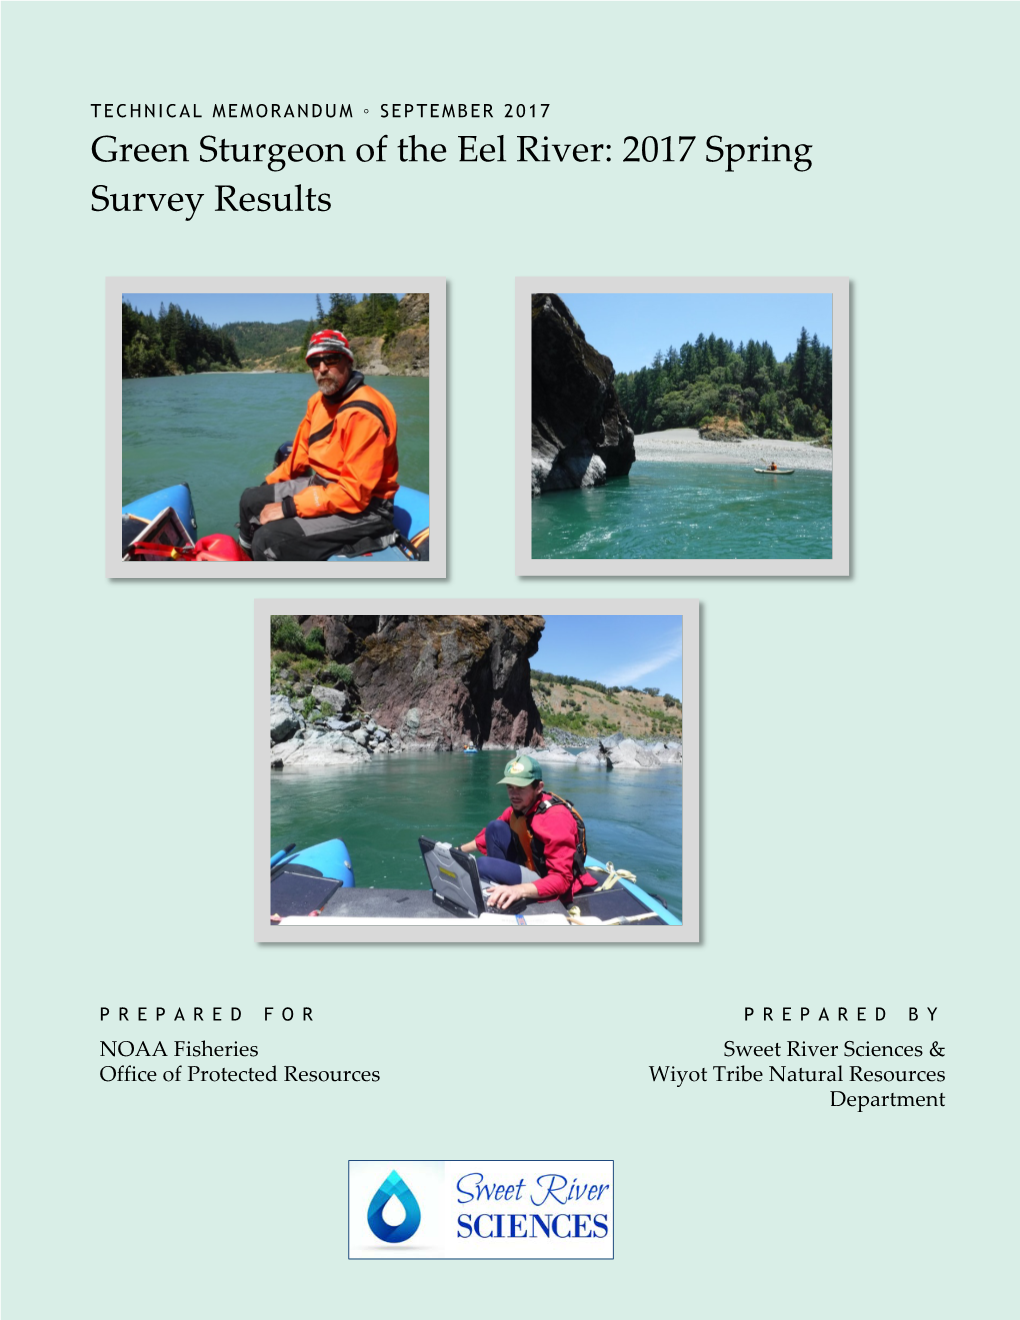 Green Sturgeon of the Eel River: 2017 Spring Survey Results